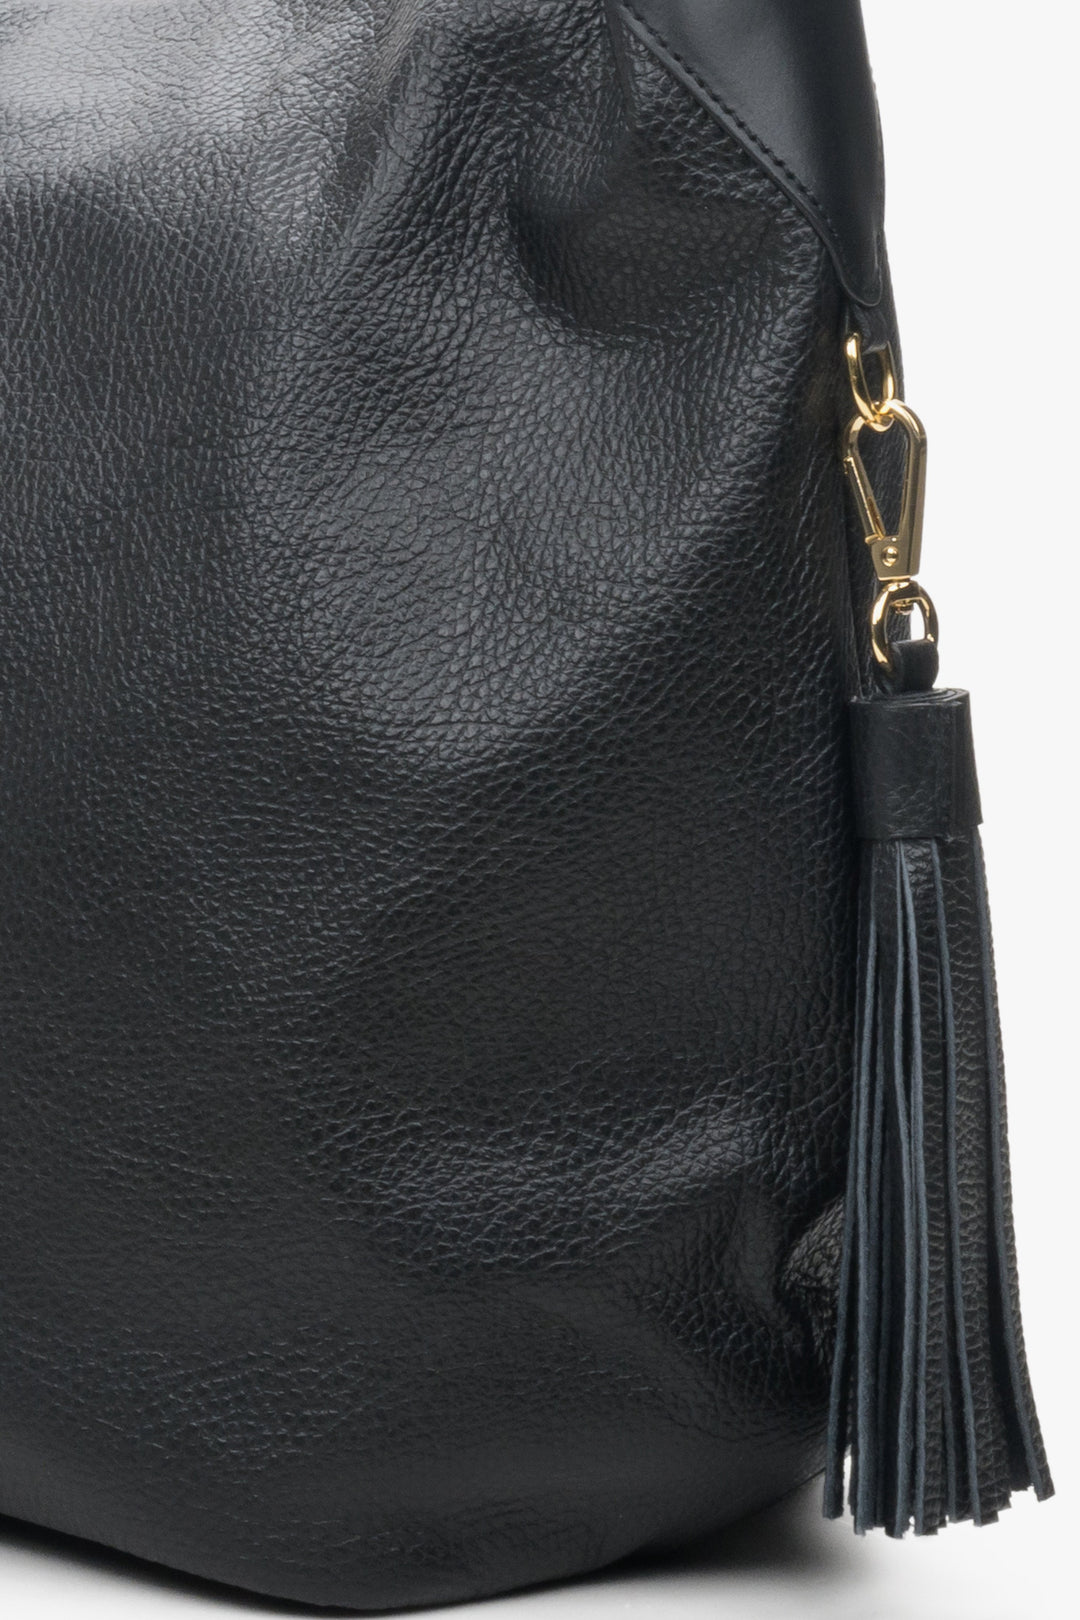 Women's black bag by Estro in genuine leather - close-up on details.